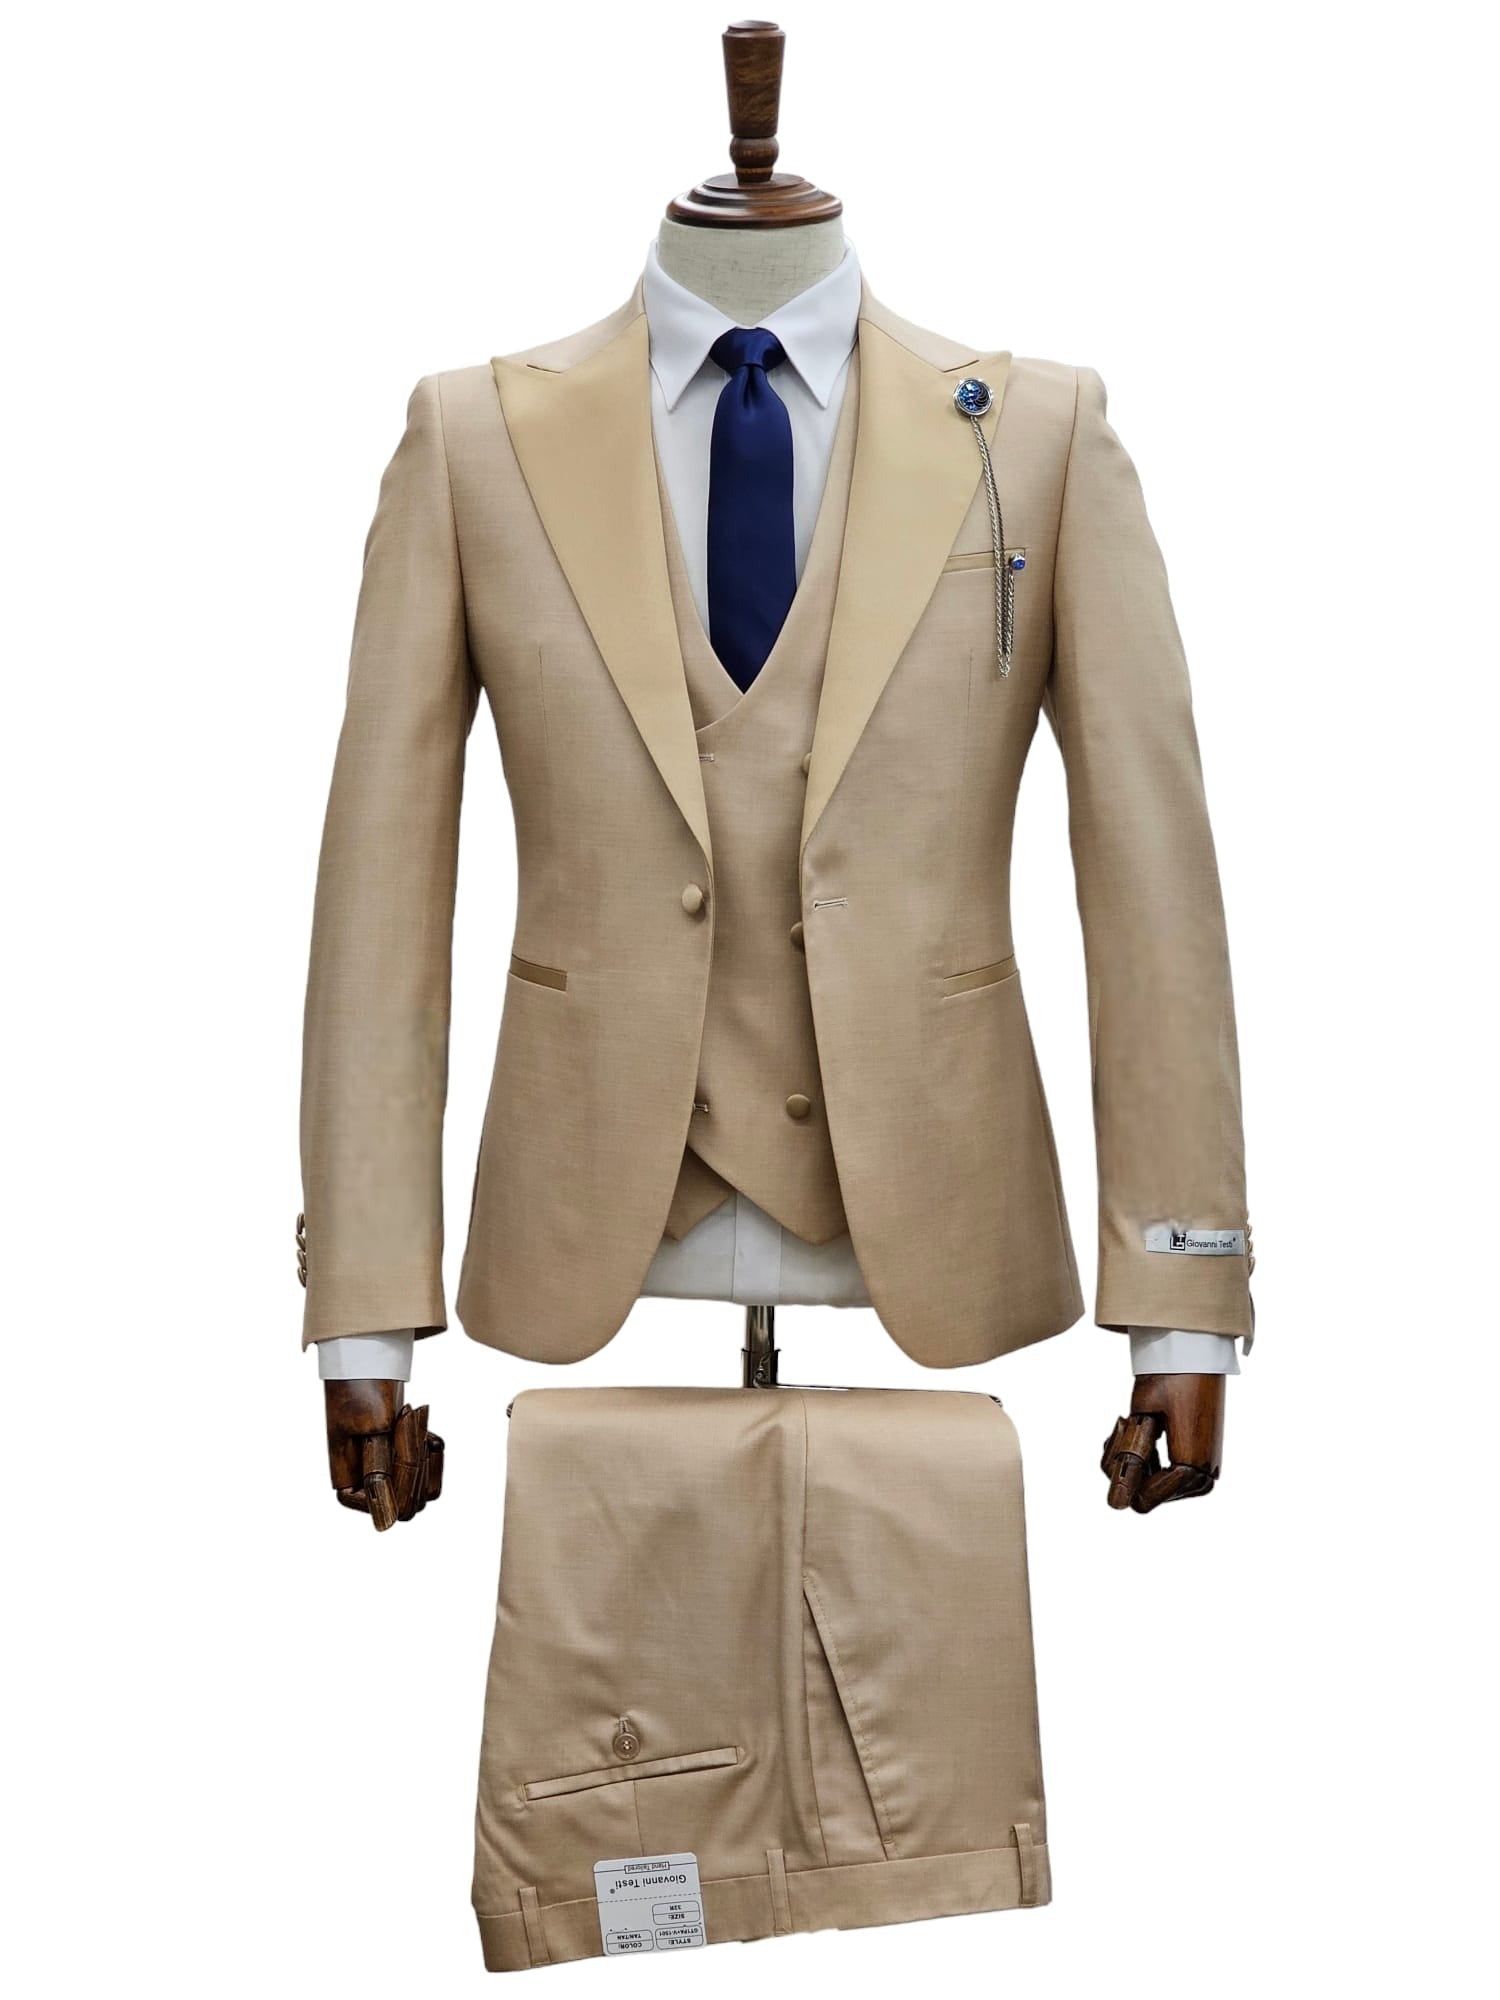 Giovanni Testi Suits With Double Breasted Vest - 3 Pieces  Peak Lapel  in Tan